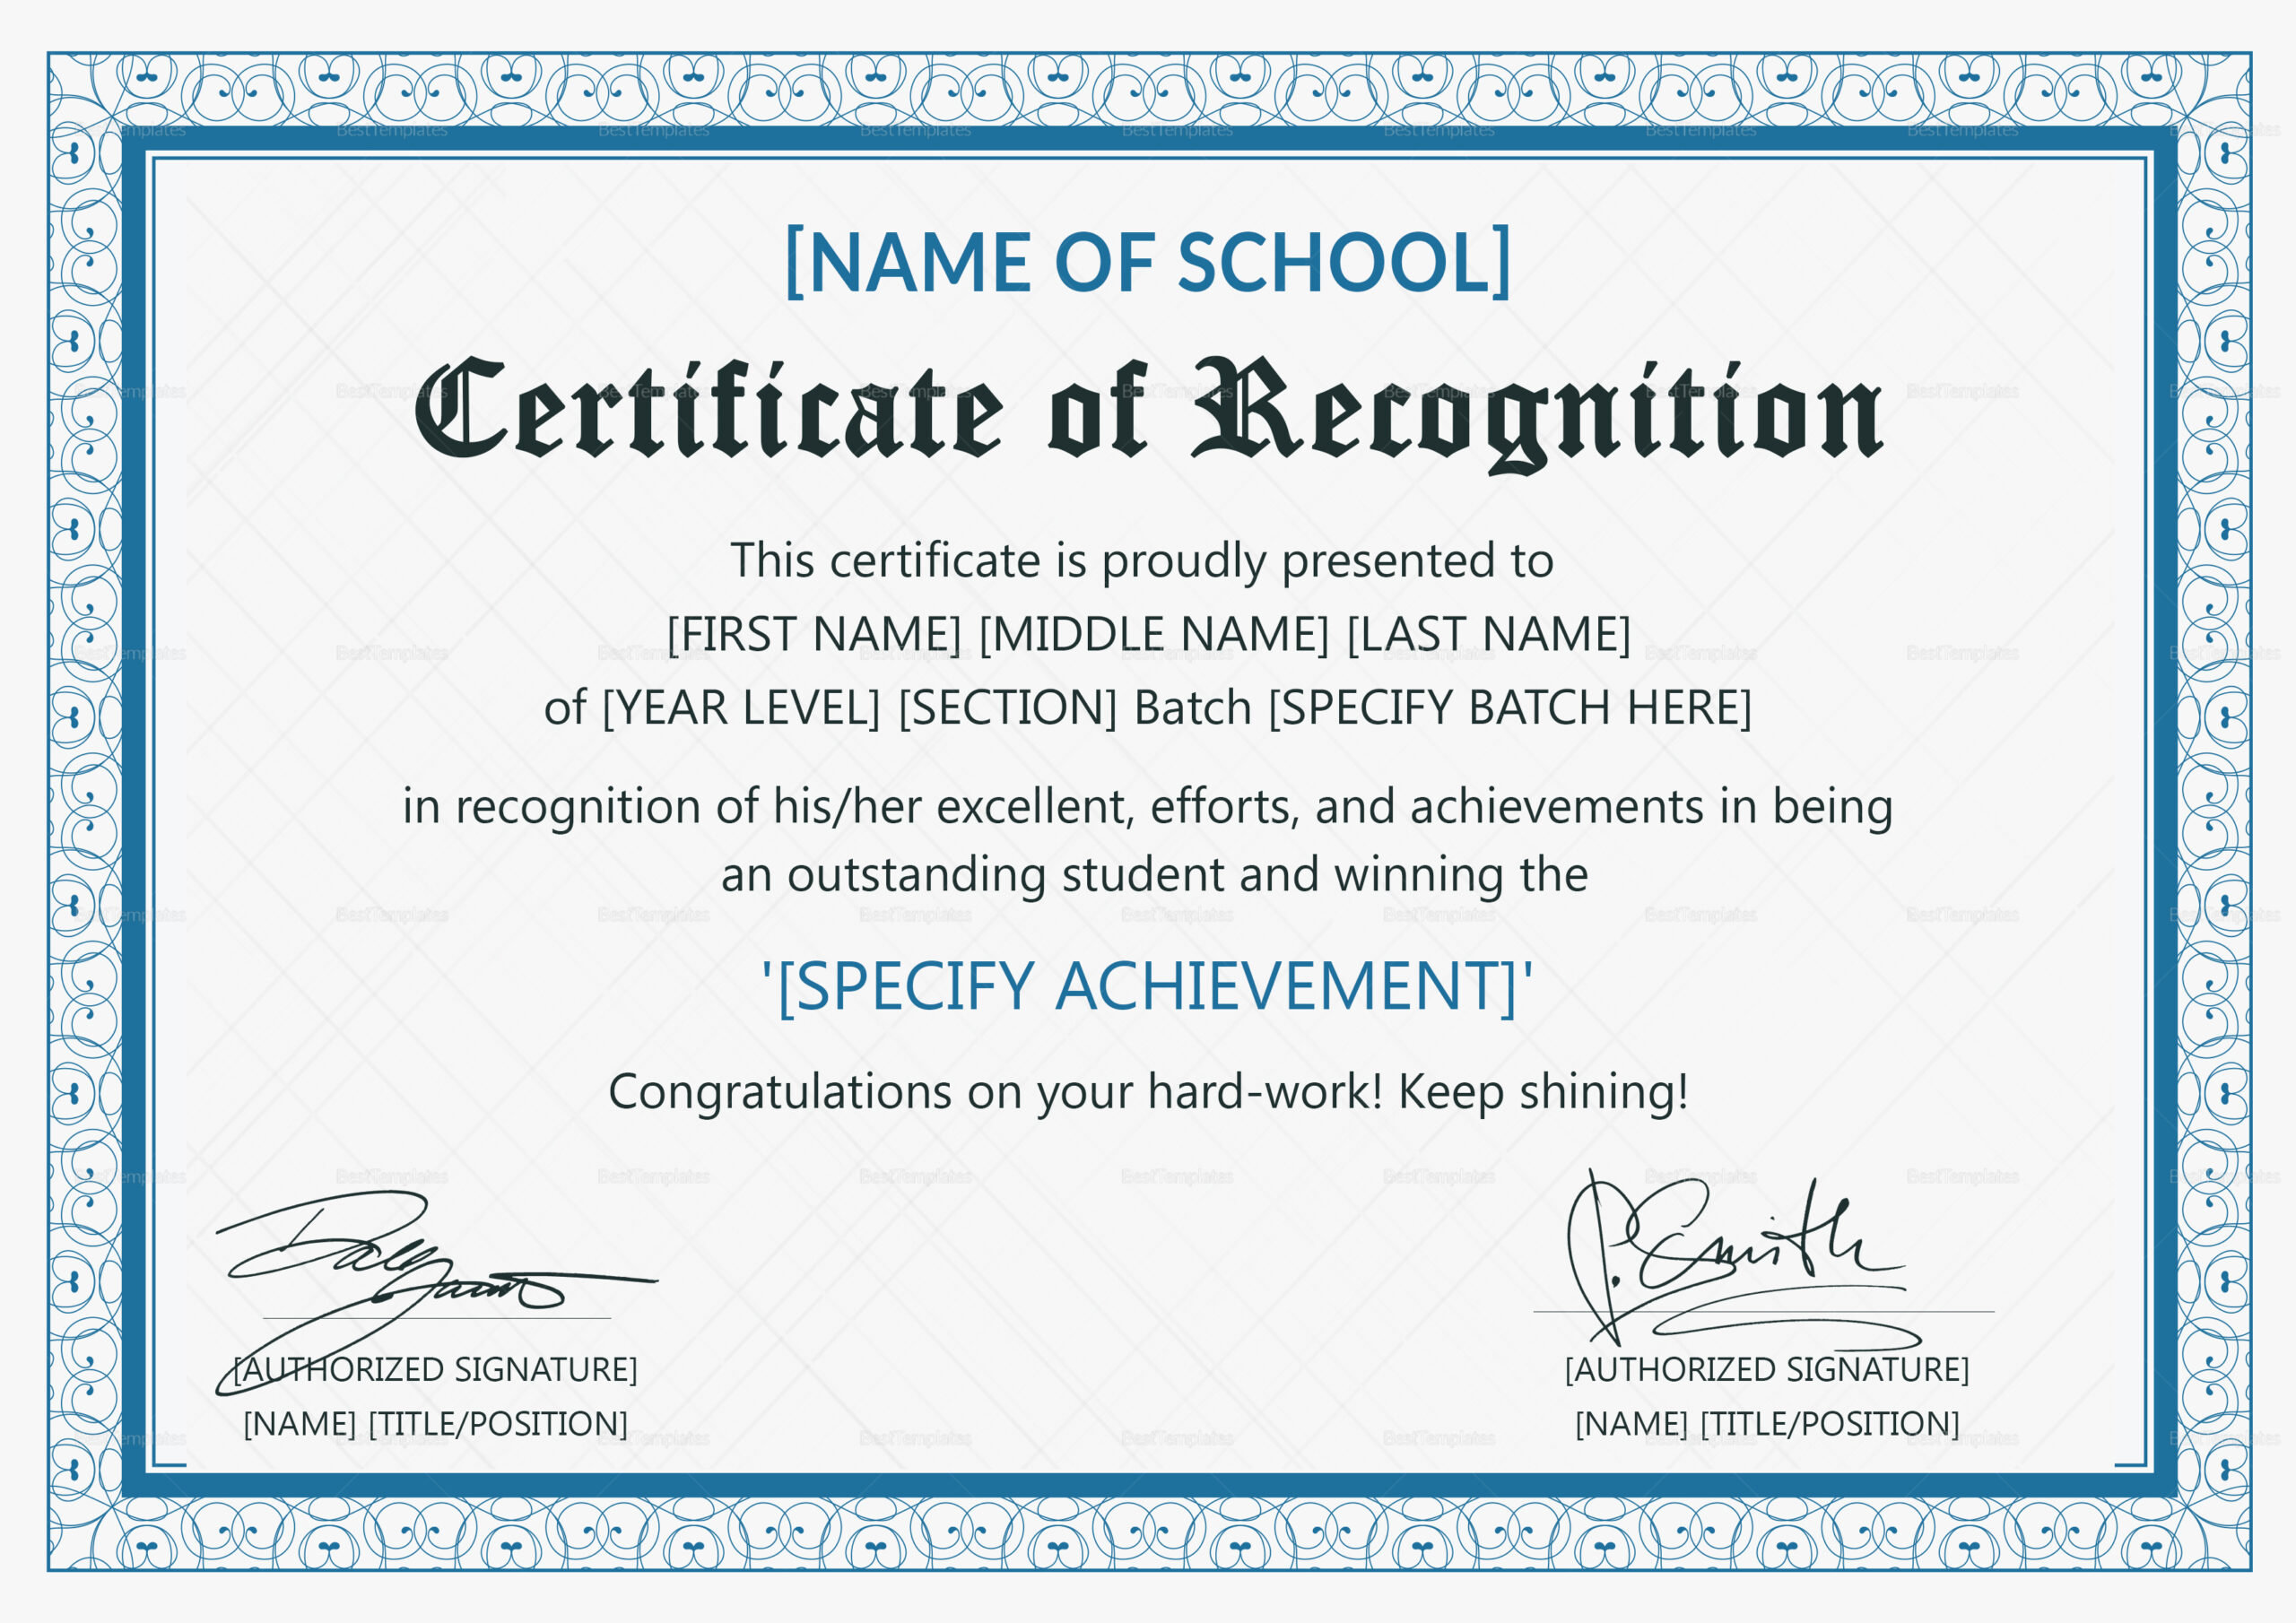 Outstanding Student Recognition Certificate Design Template in PSD  Regarding Certificate Of Recognition Word Template